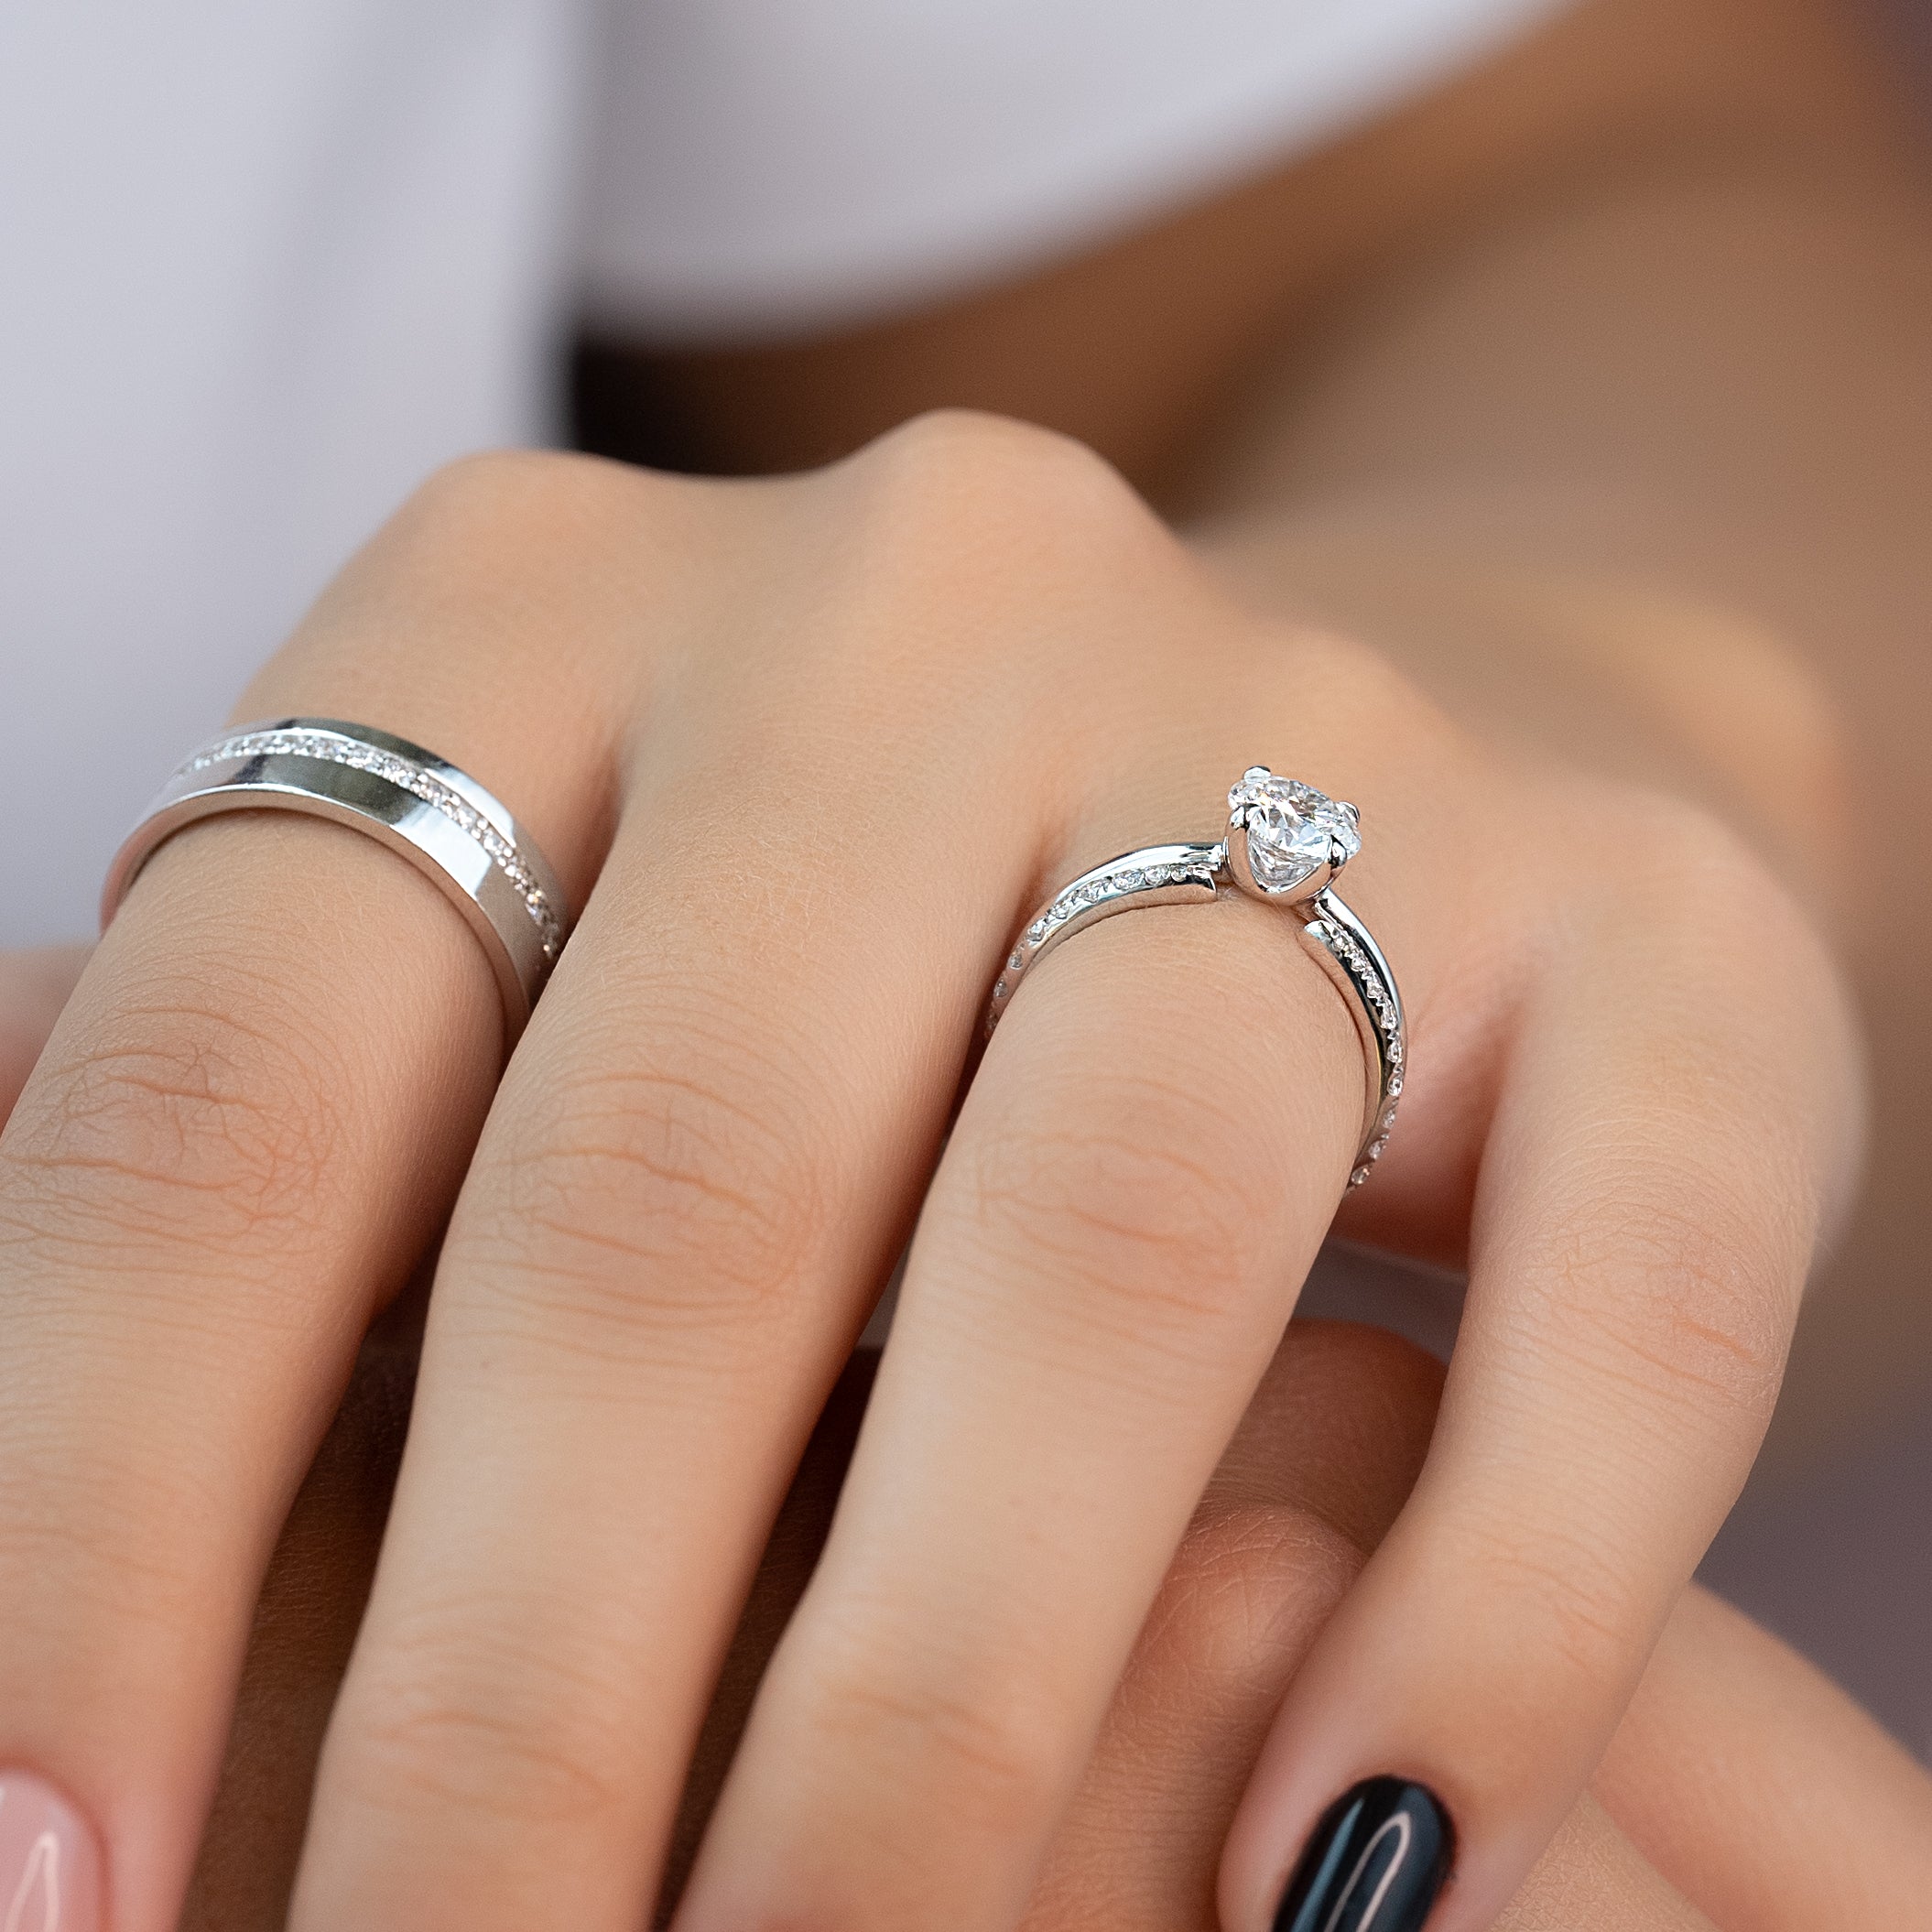 All About My Engagement Ring - Ashley & Emily